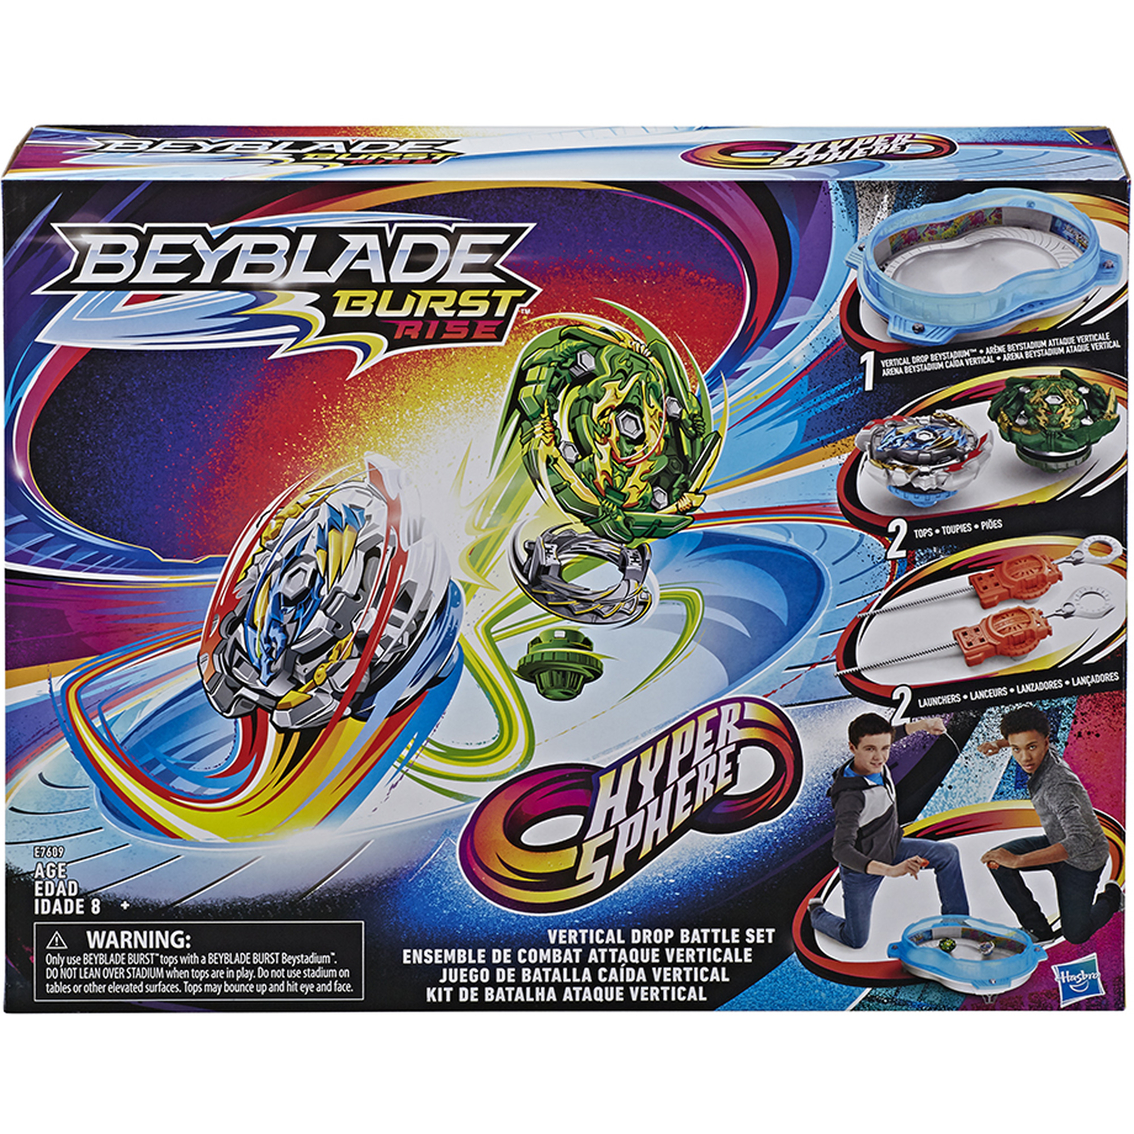 shops that sell beyblades